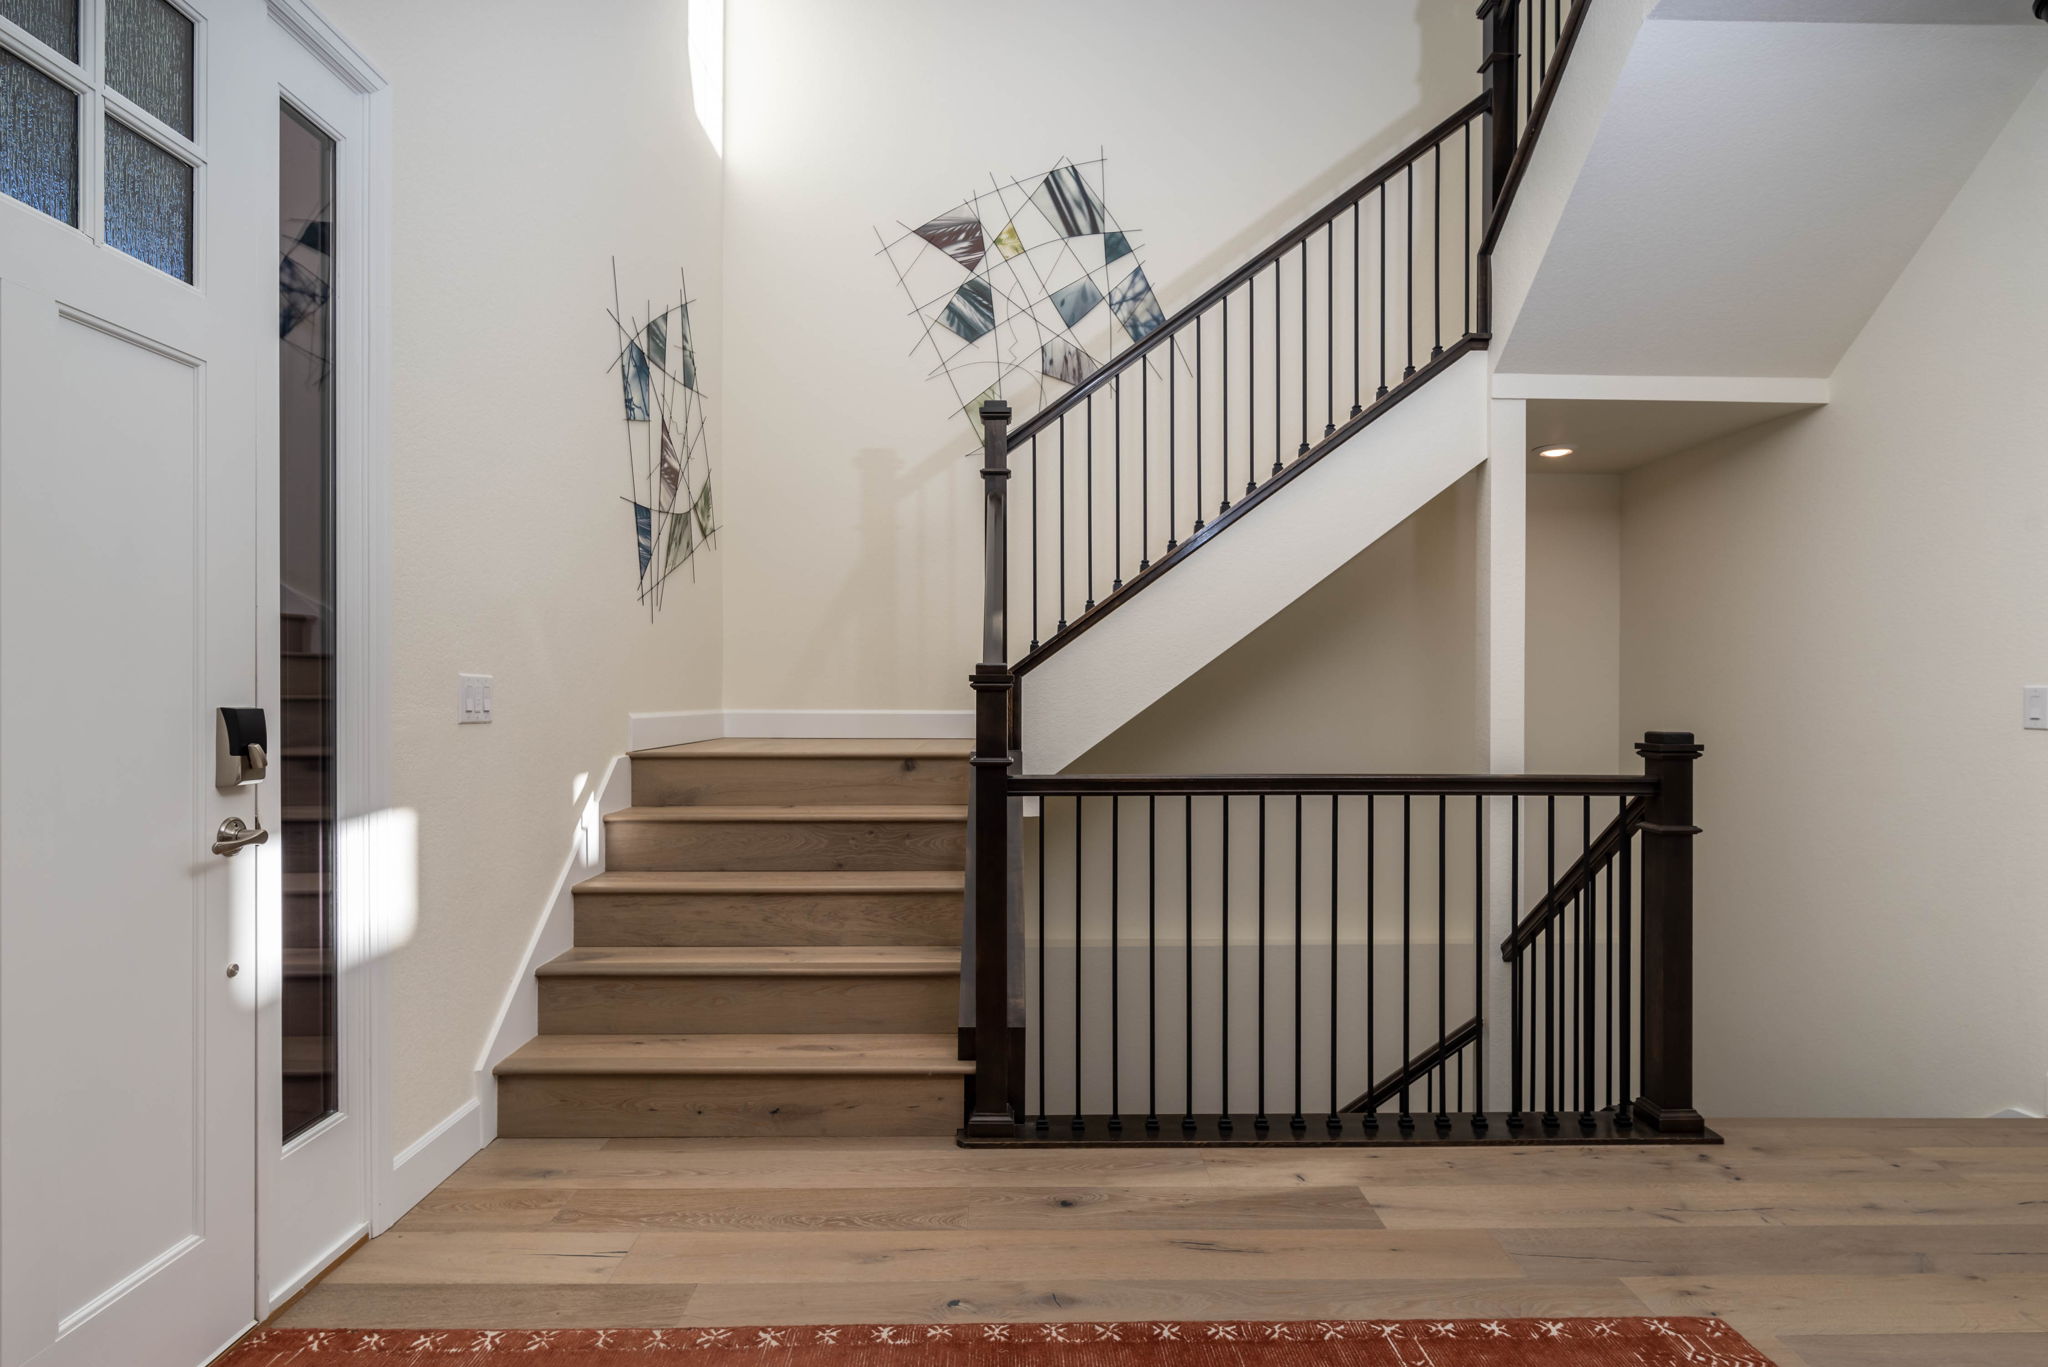 Foyer/Staircase